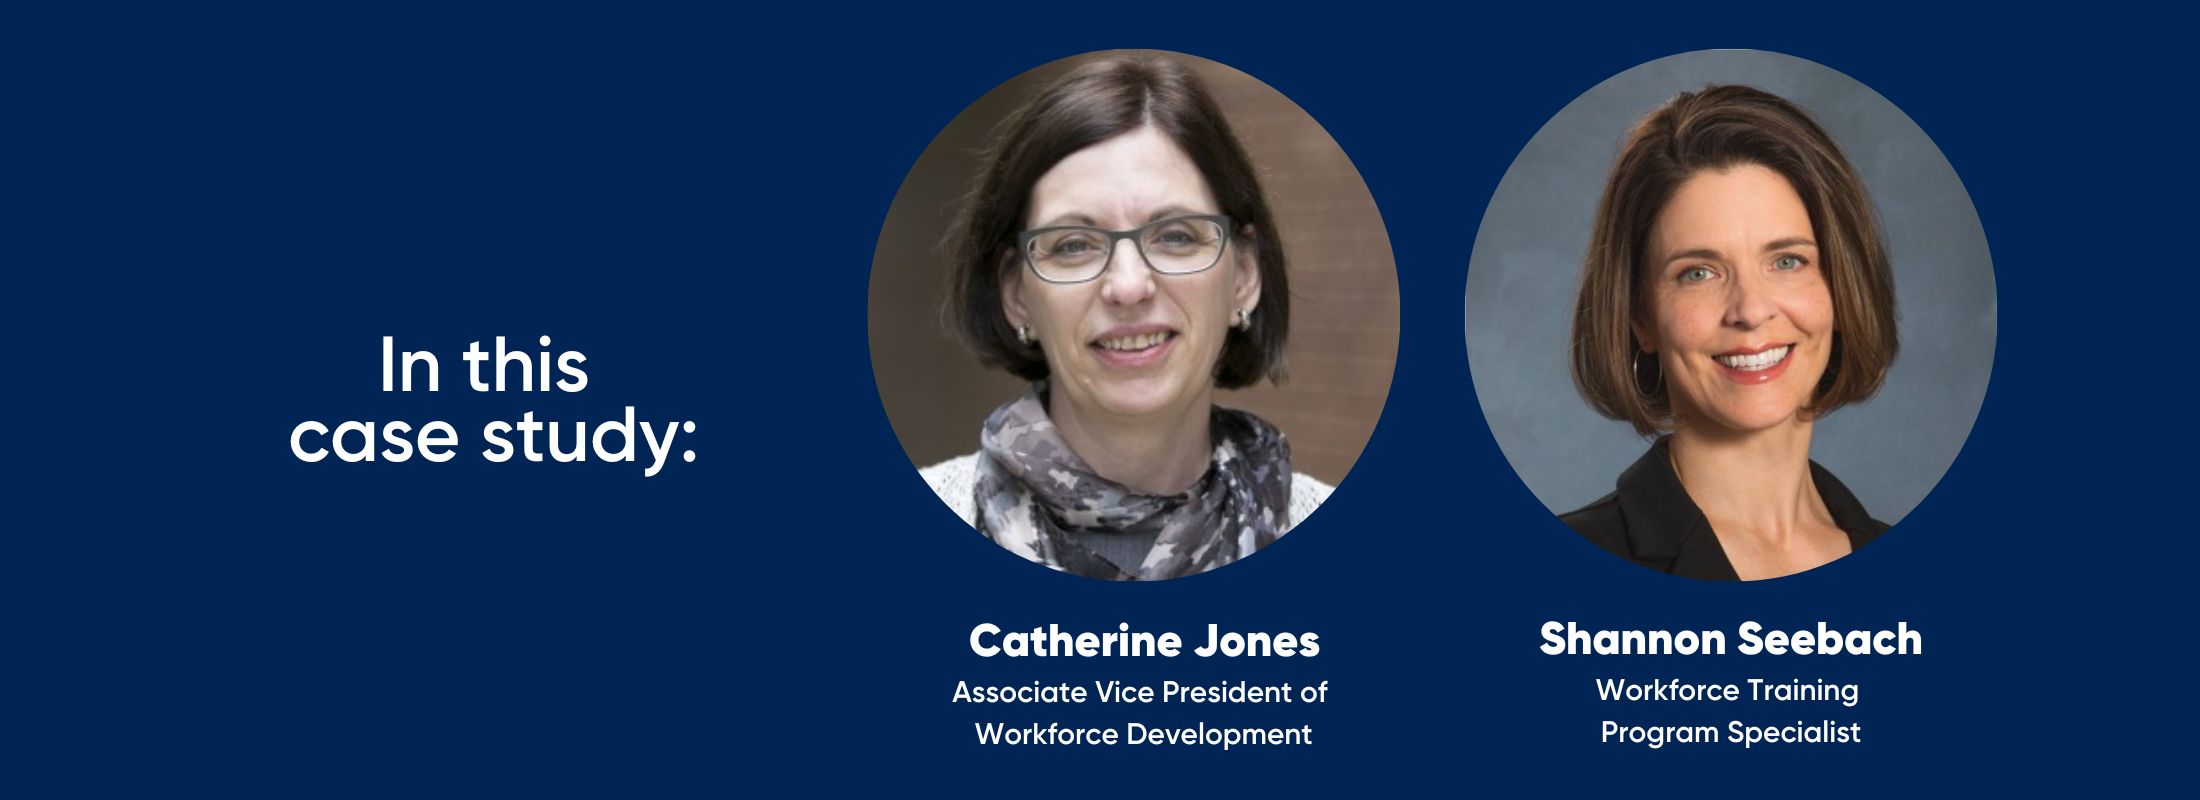 In this case study: Shannon Seebach, Workforce Training Program Specialist and Catherine Jones, Associate Vice President of Workforce Development